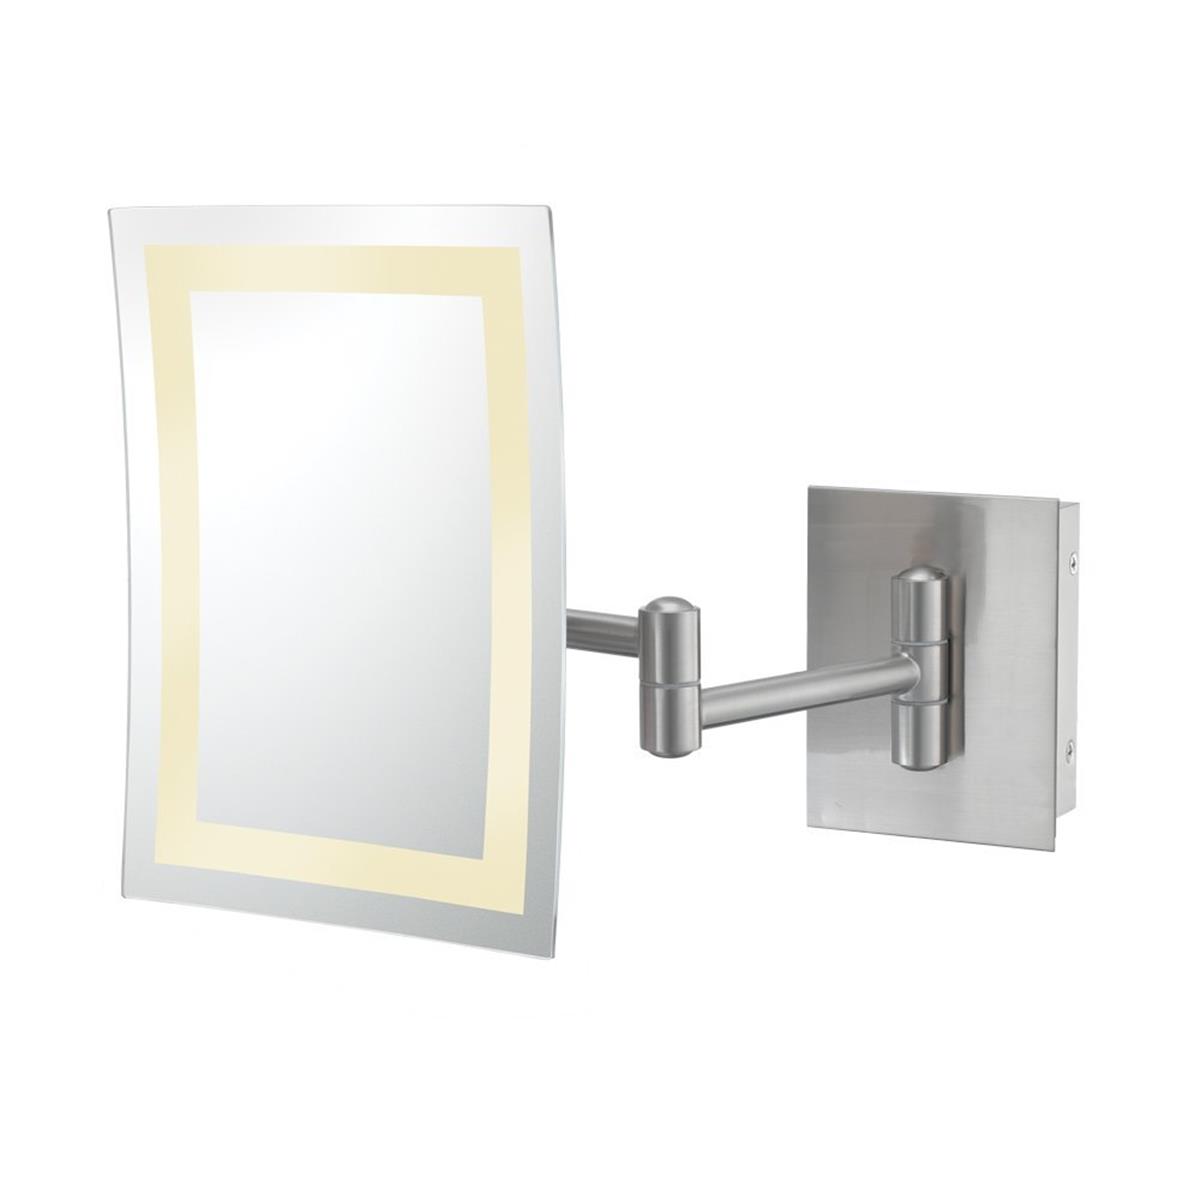 Picture of Aptations 713-55-83 Single-Sided LED Square Freestanding Mirror - Rechargeable, Polished Nickel